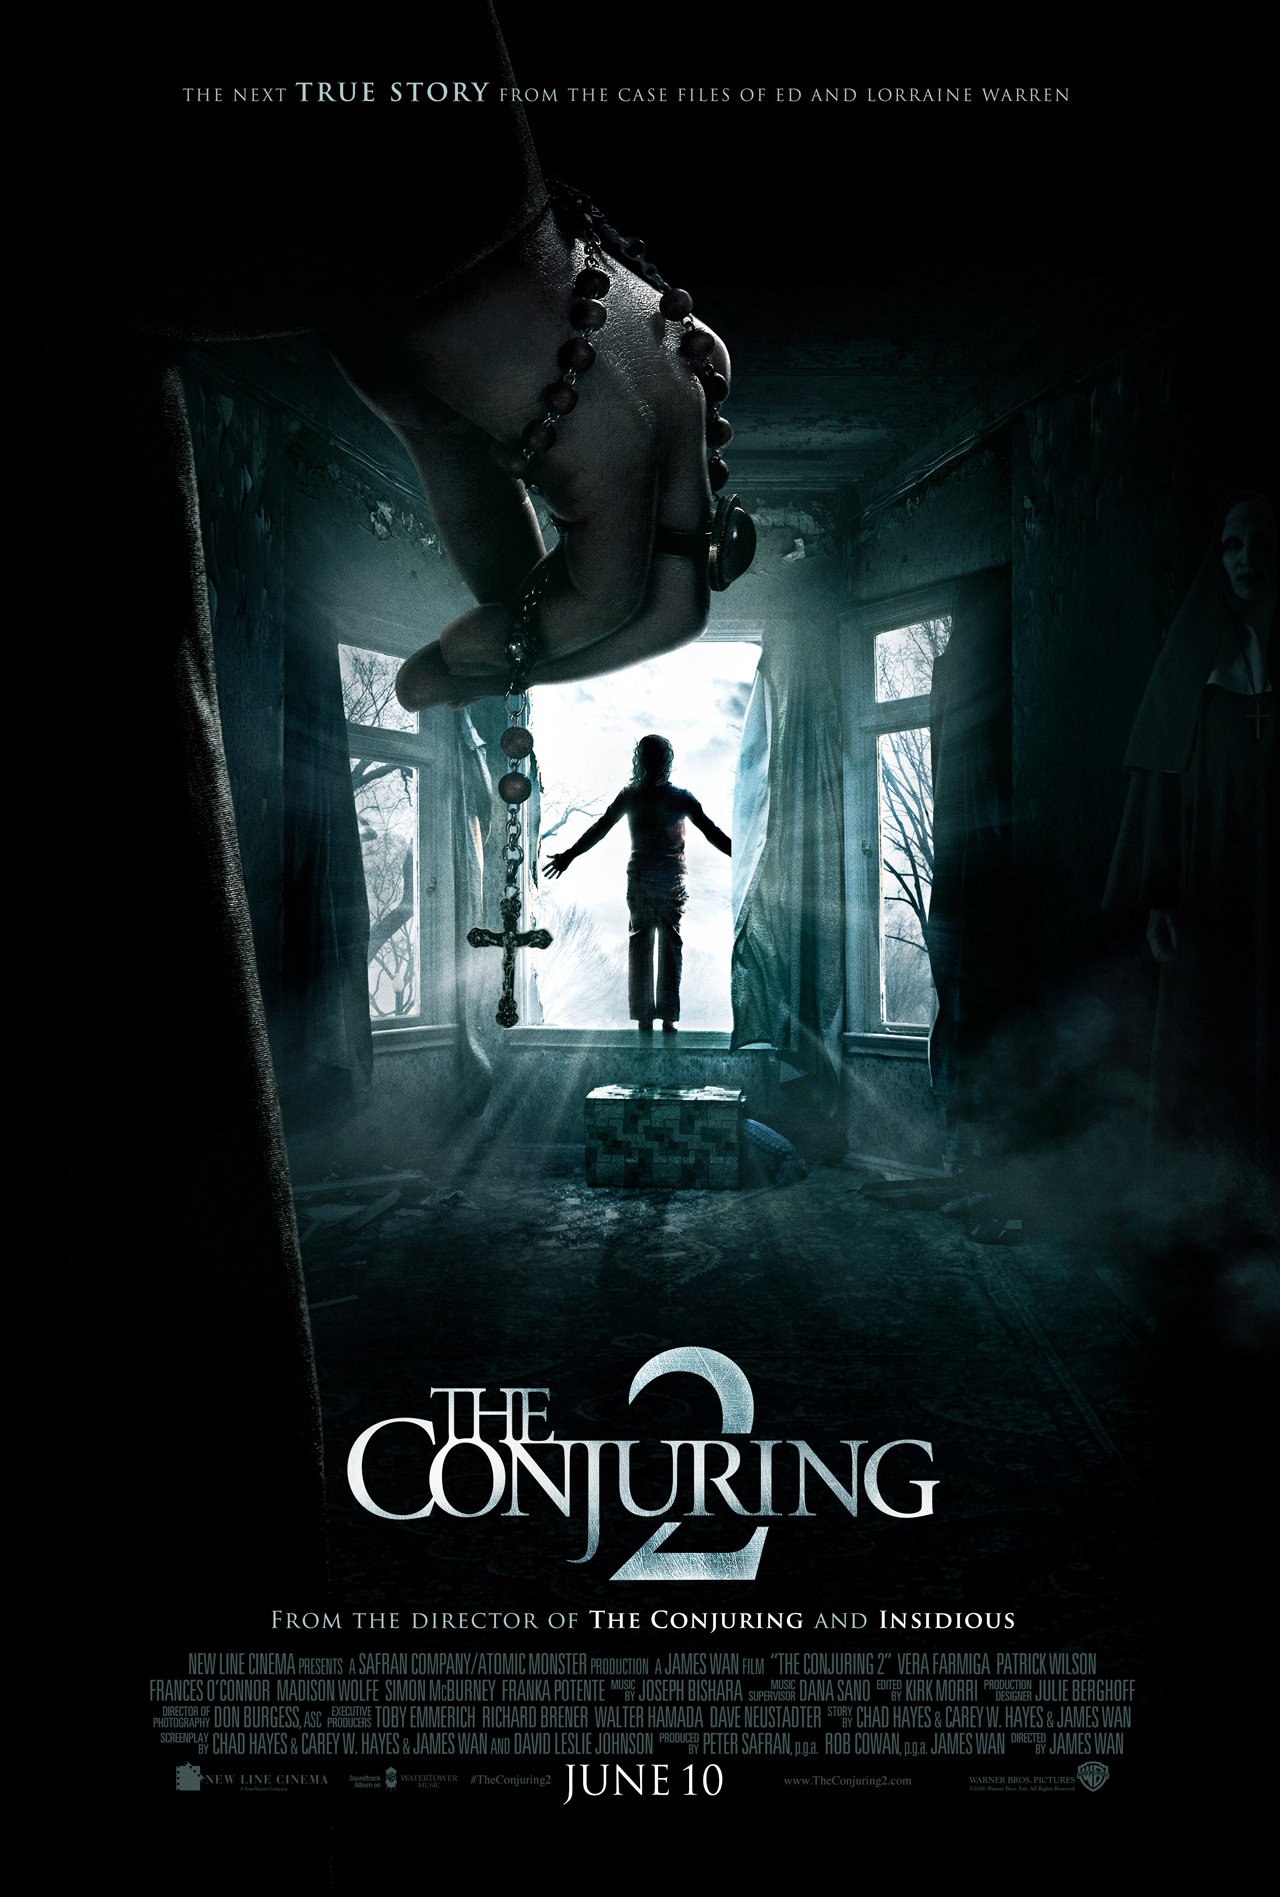 FULL MOVIE: The Conjuring 2 (2016)